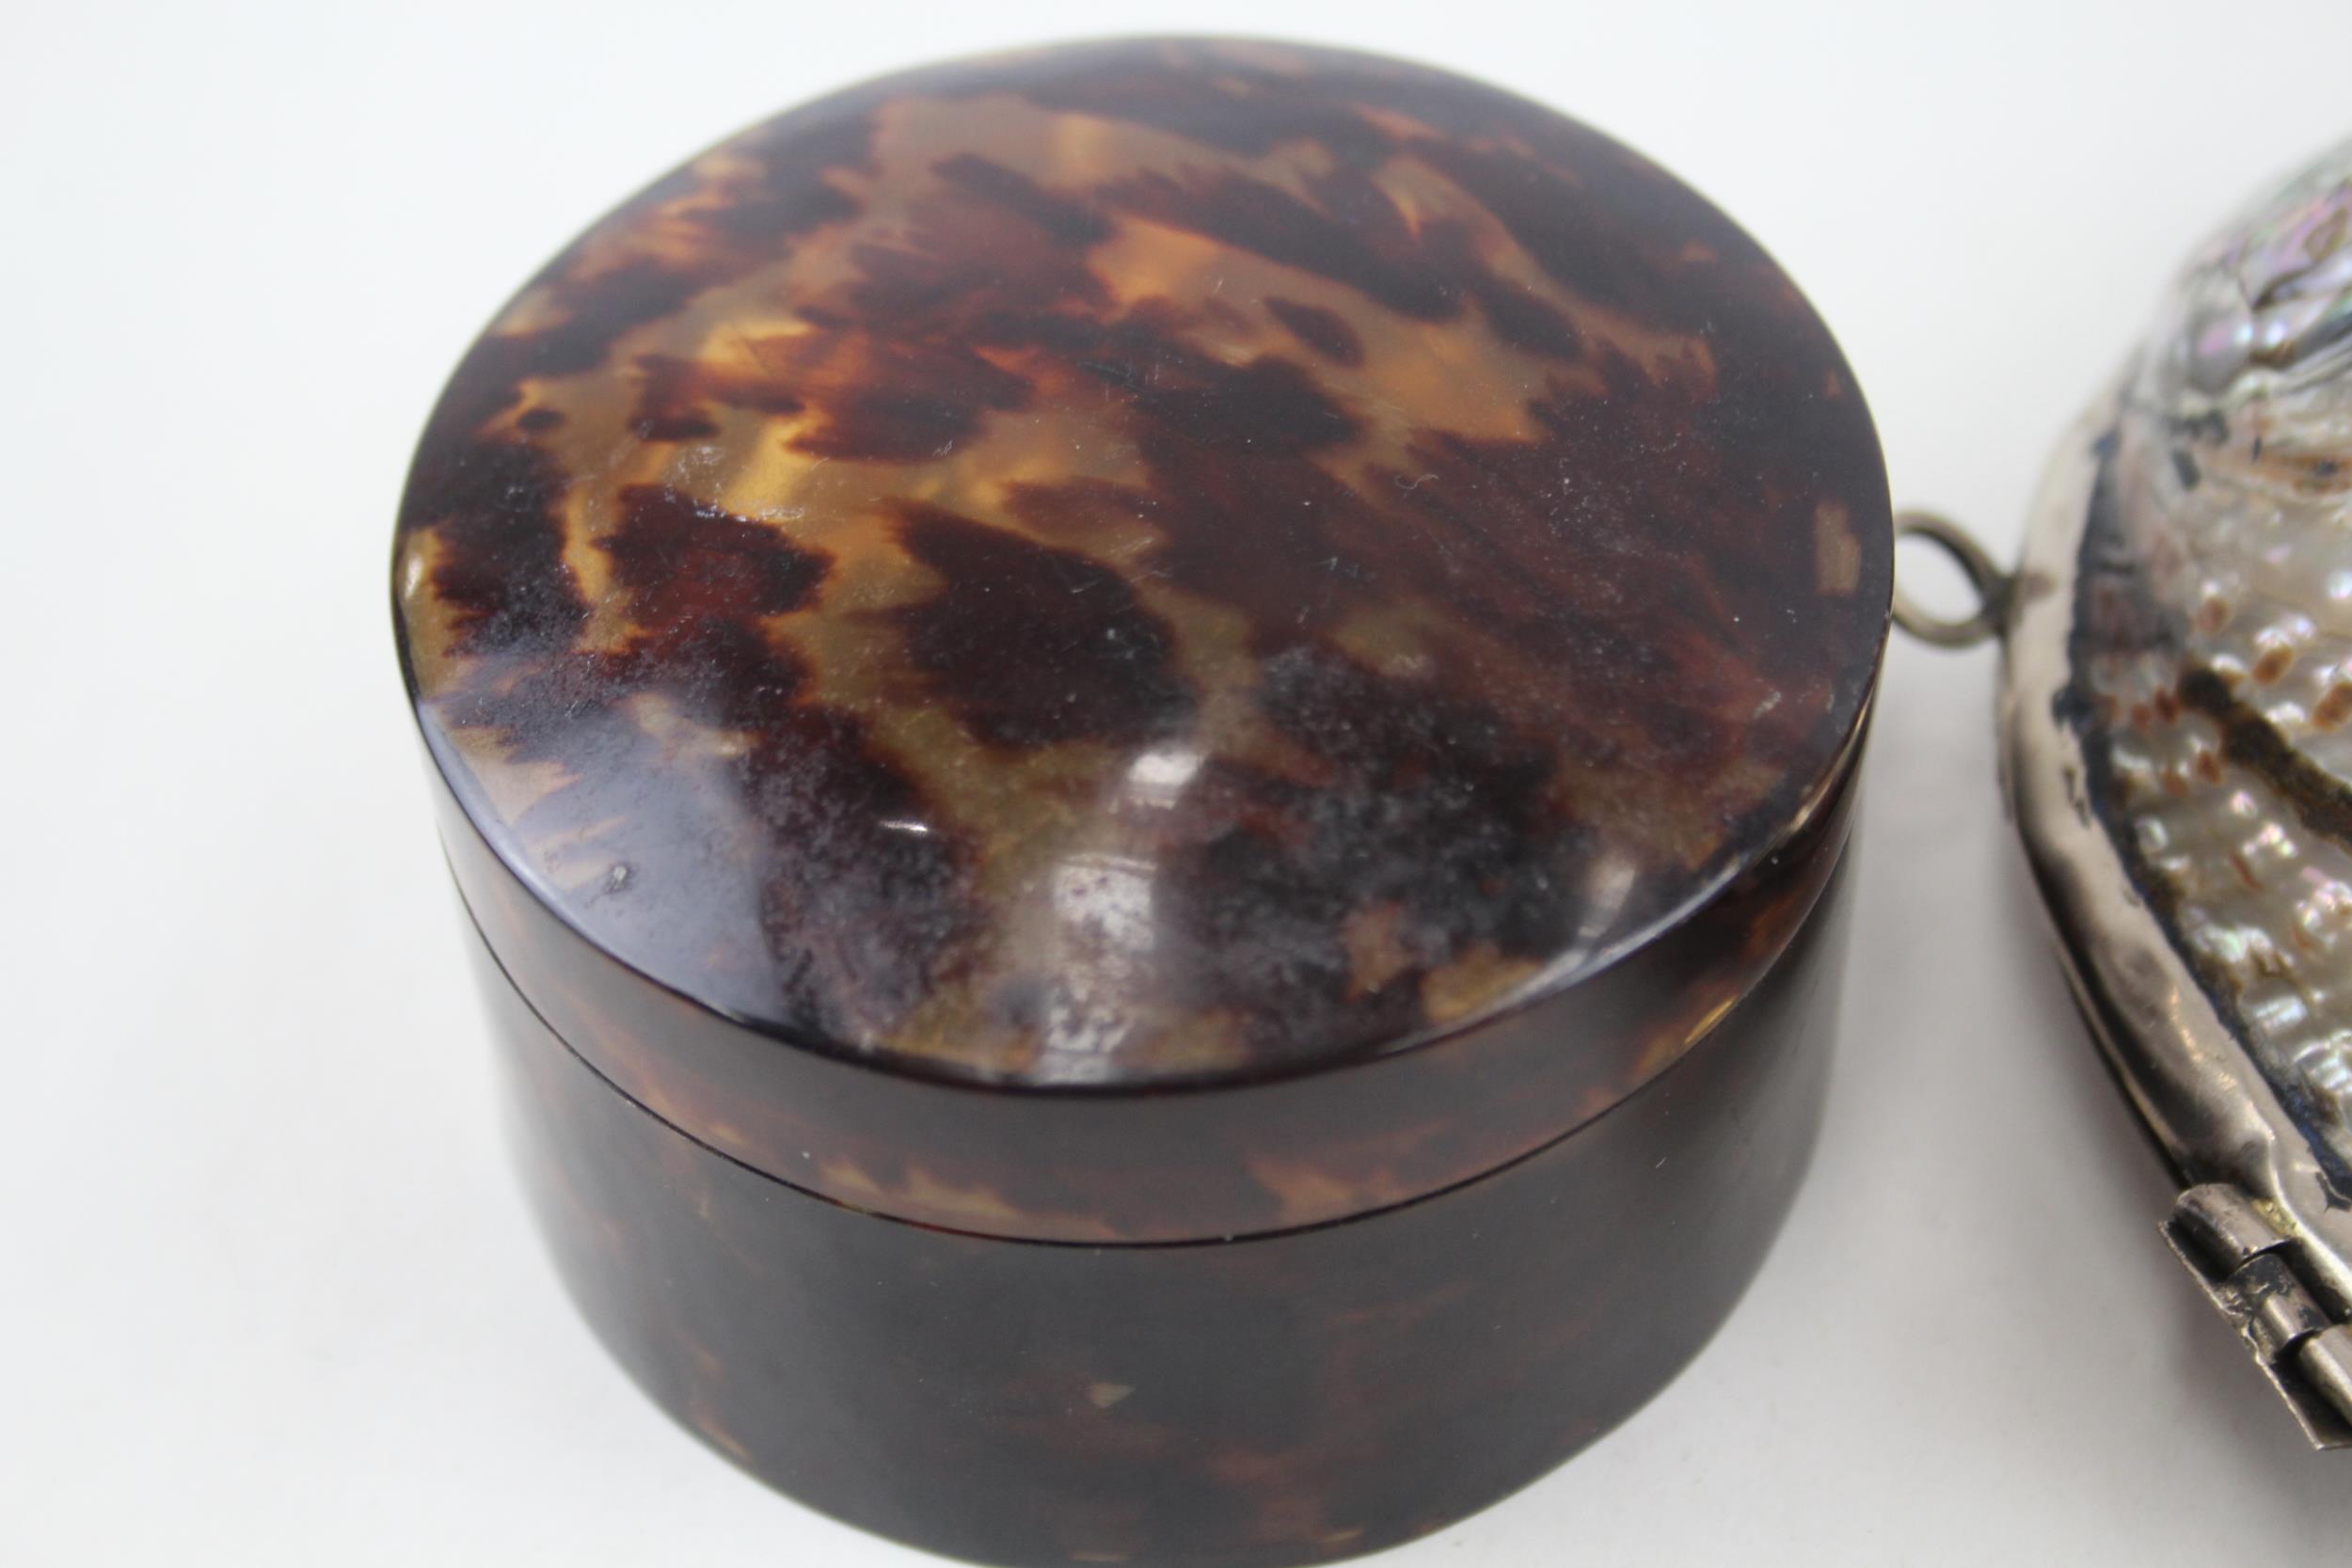 3 x Antique / Vintage TRINKET BOXES Inc Lacquer, Tortoiseshell, Abalone Shell - In antique / vintage - Image 4 of 9